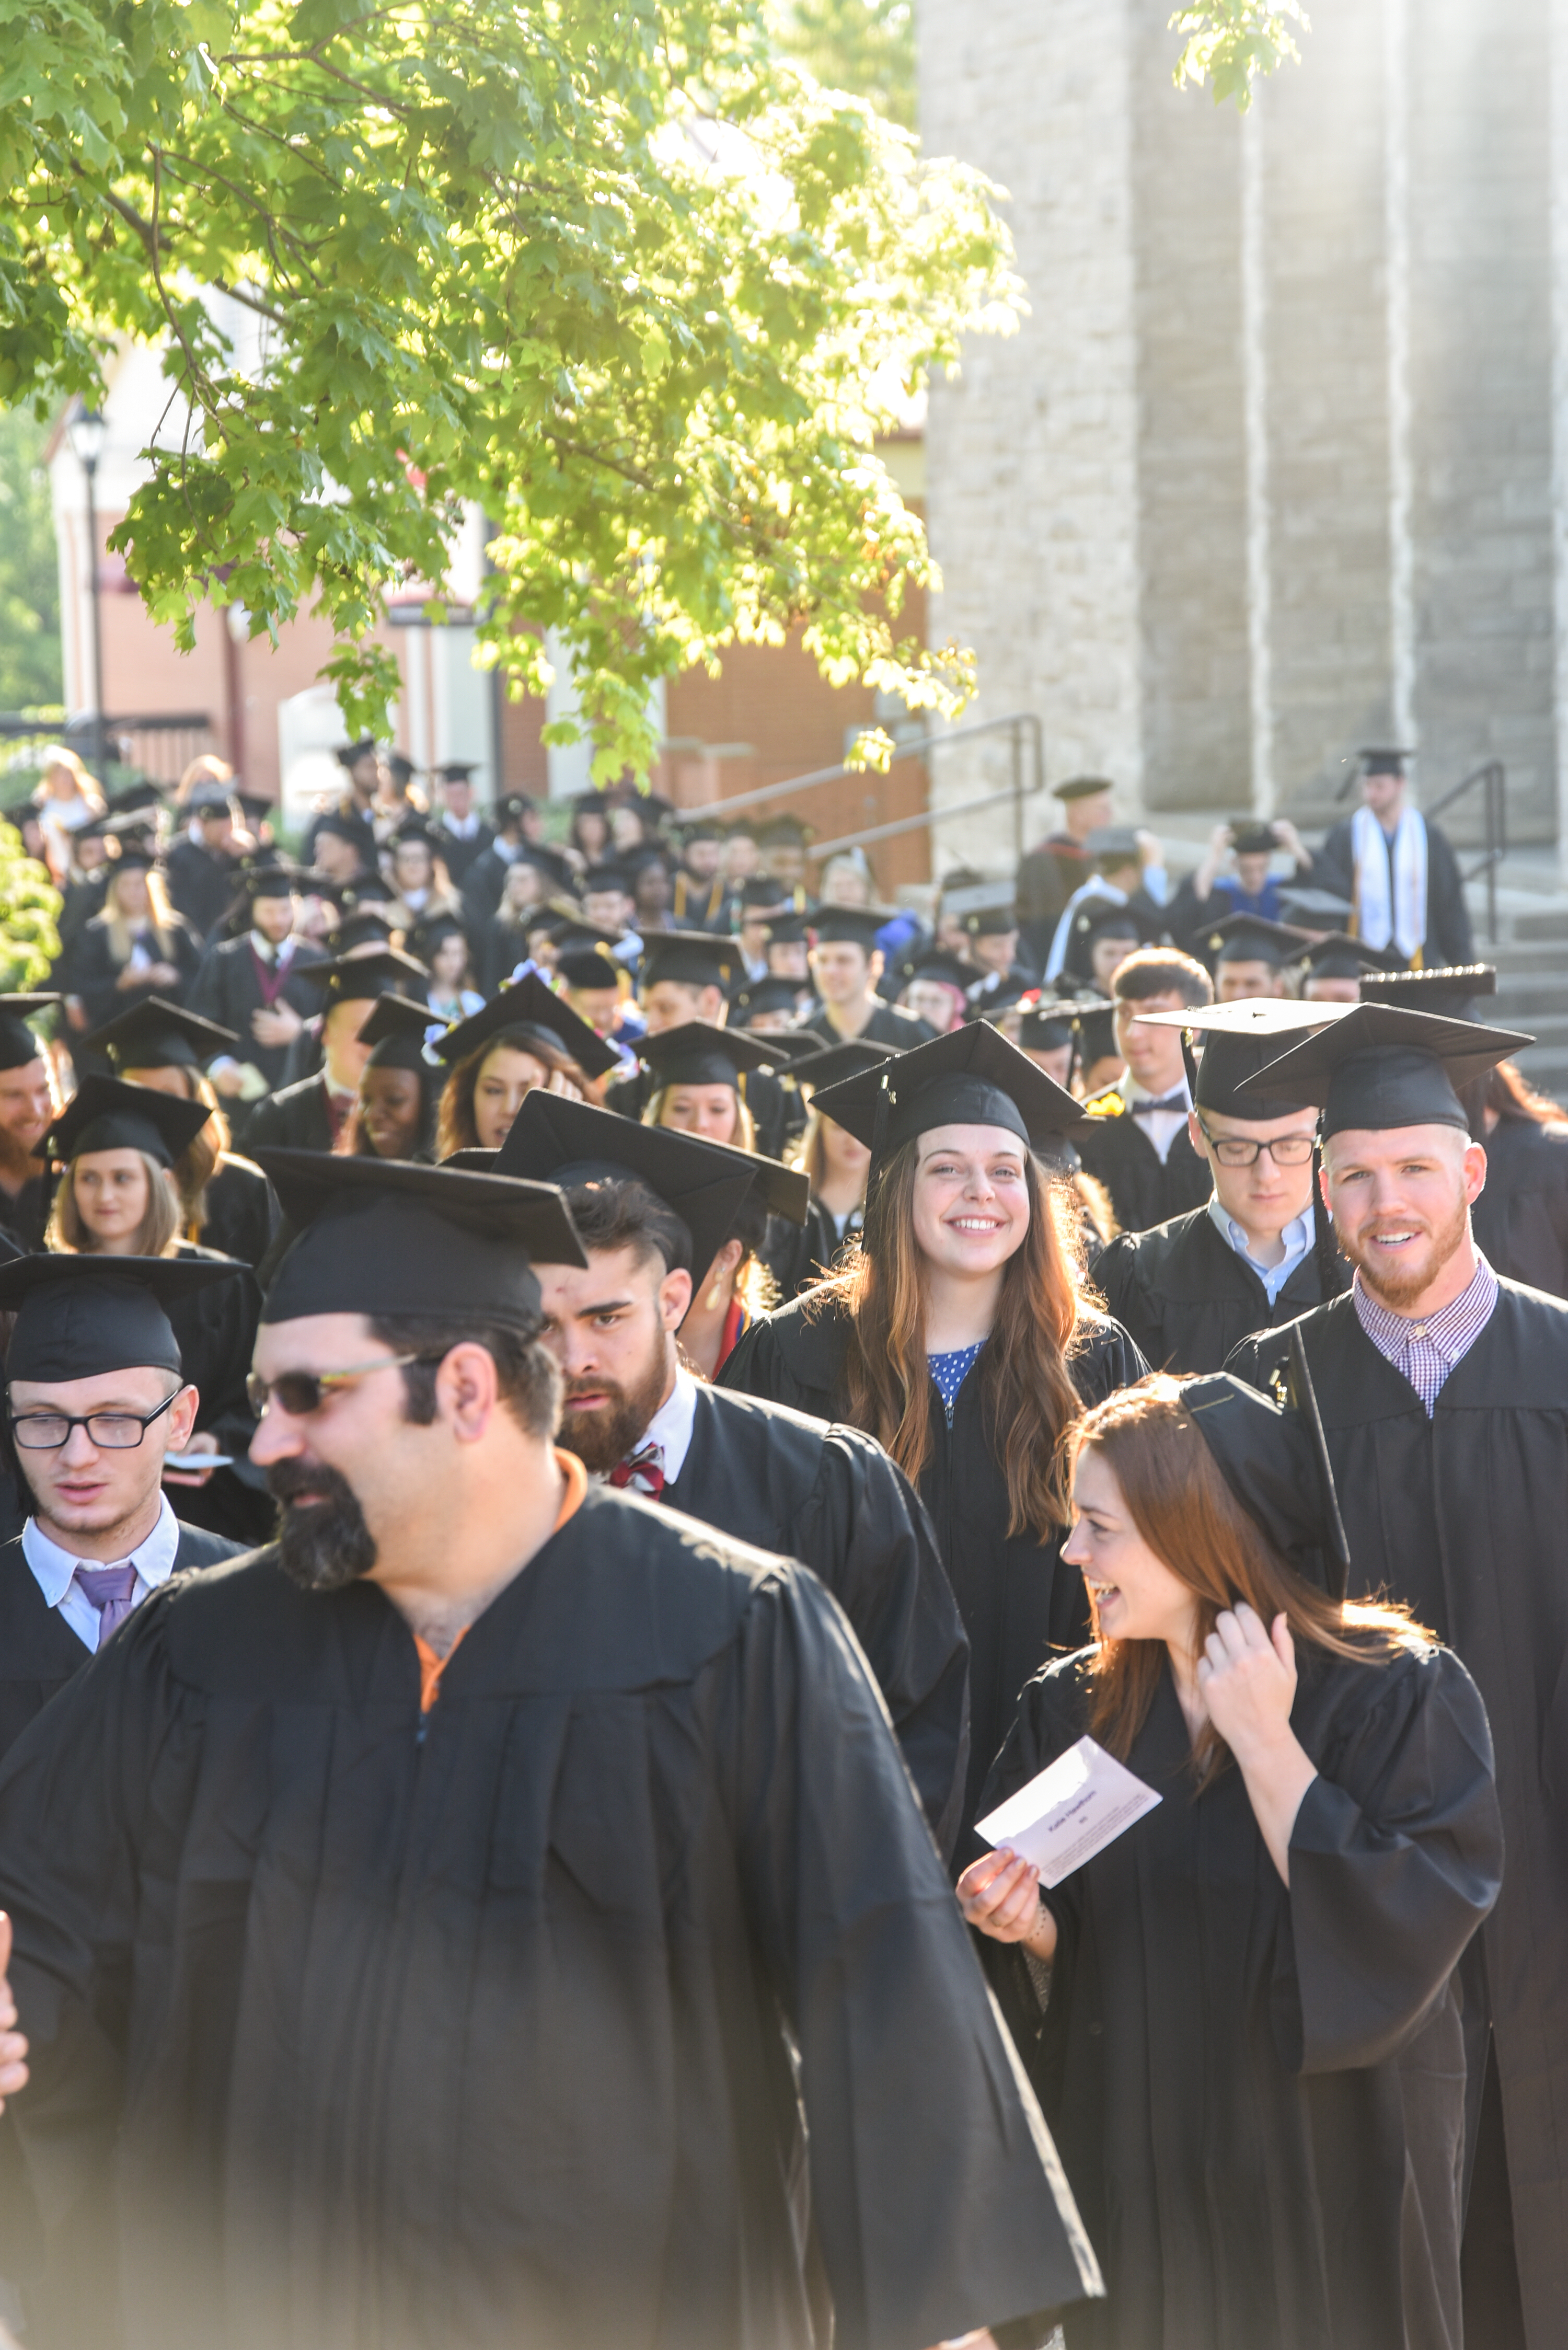 Campbellsville University graduates take part in the traditional “Senior Walk” on campus, before their graduation ceremony. (Campbellsville University Photo by Joshua Williams)